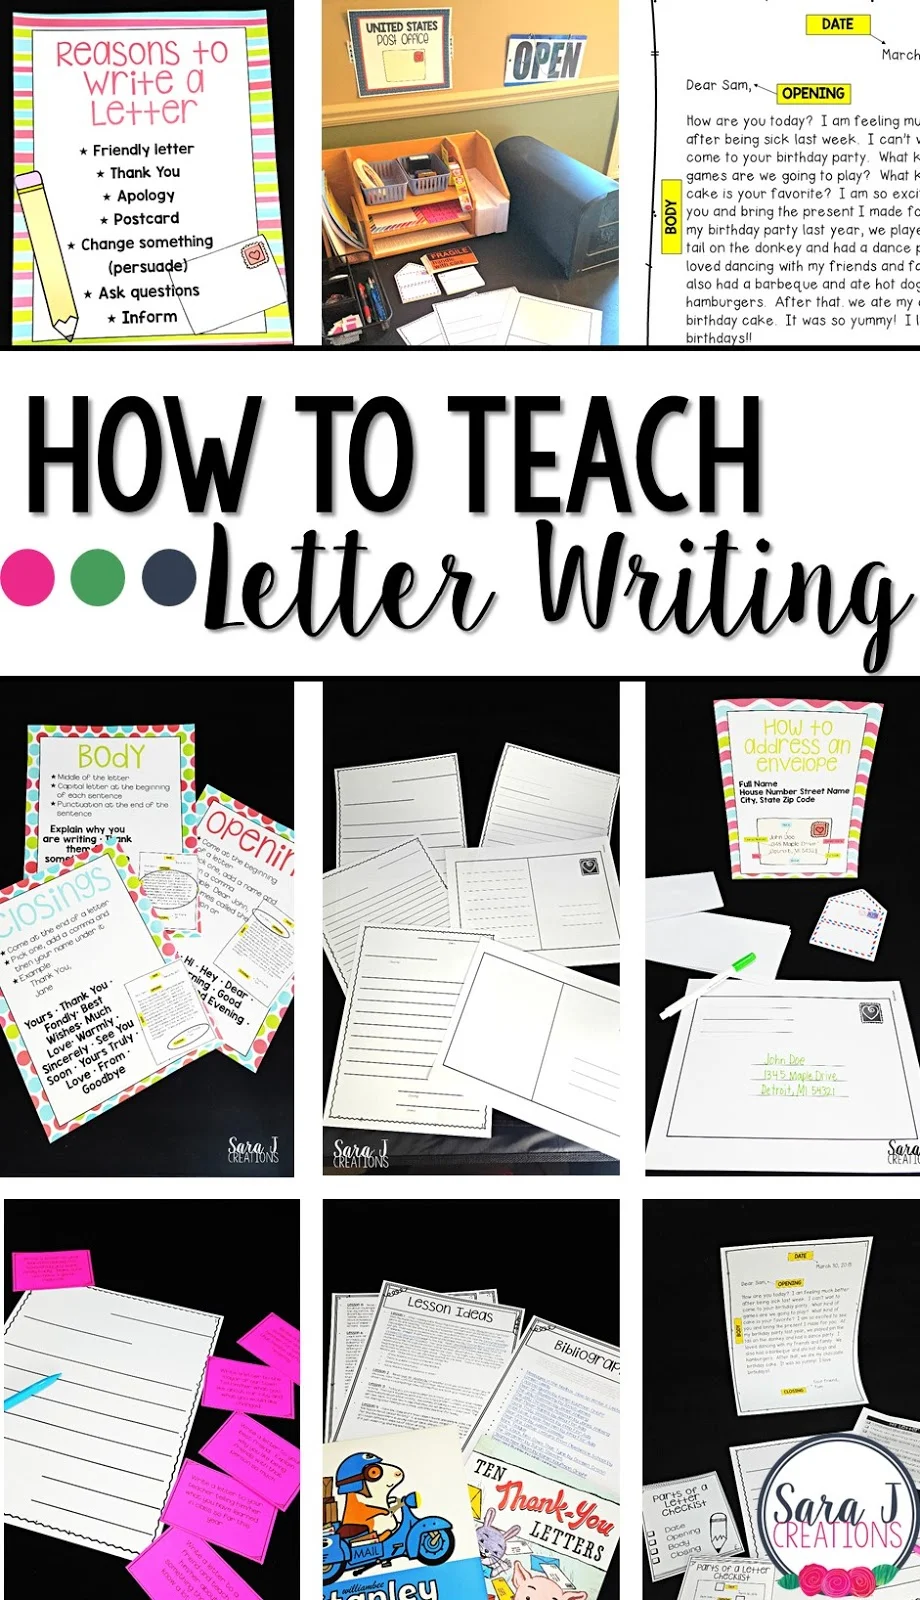 I love teaching letter writing in the classroom. Students love writing friendly letters to each other. I've got 6 ideas for making teaching letter writing easier for you including sample anchor charts, picture book ideas and extension activities.